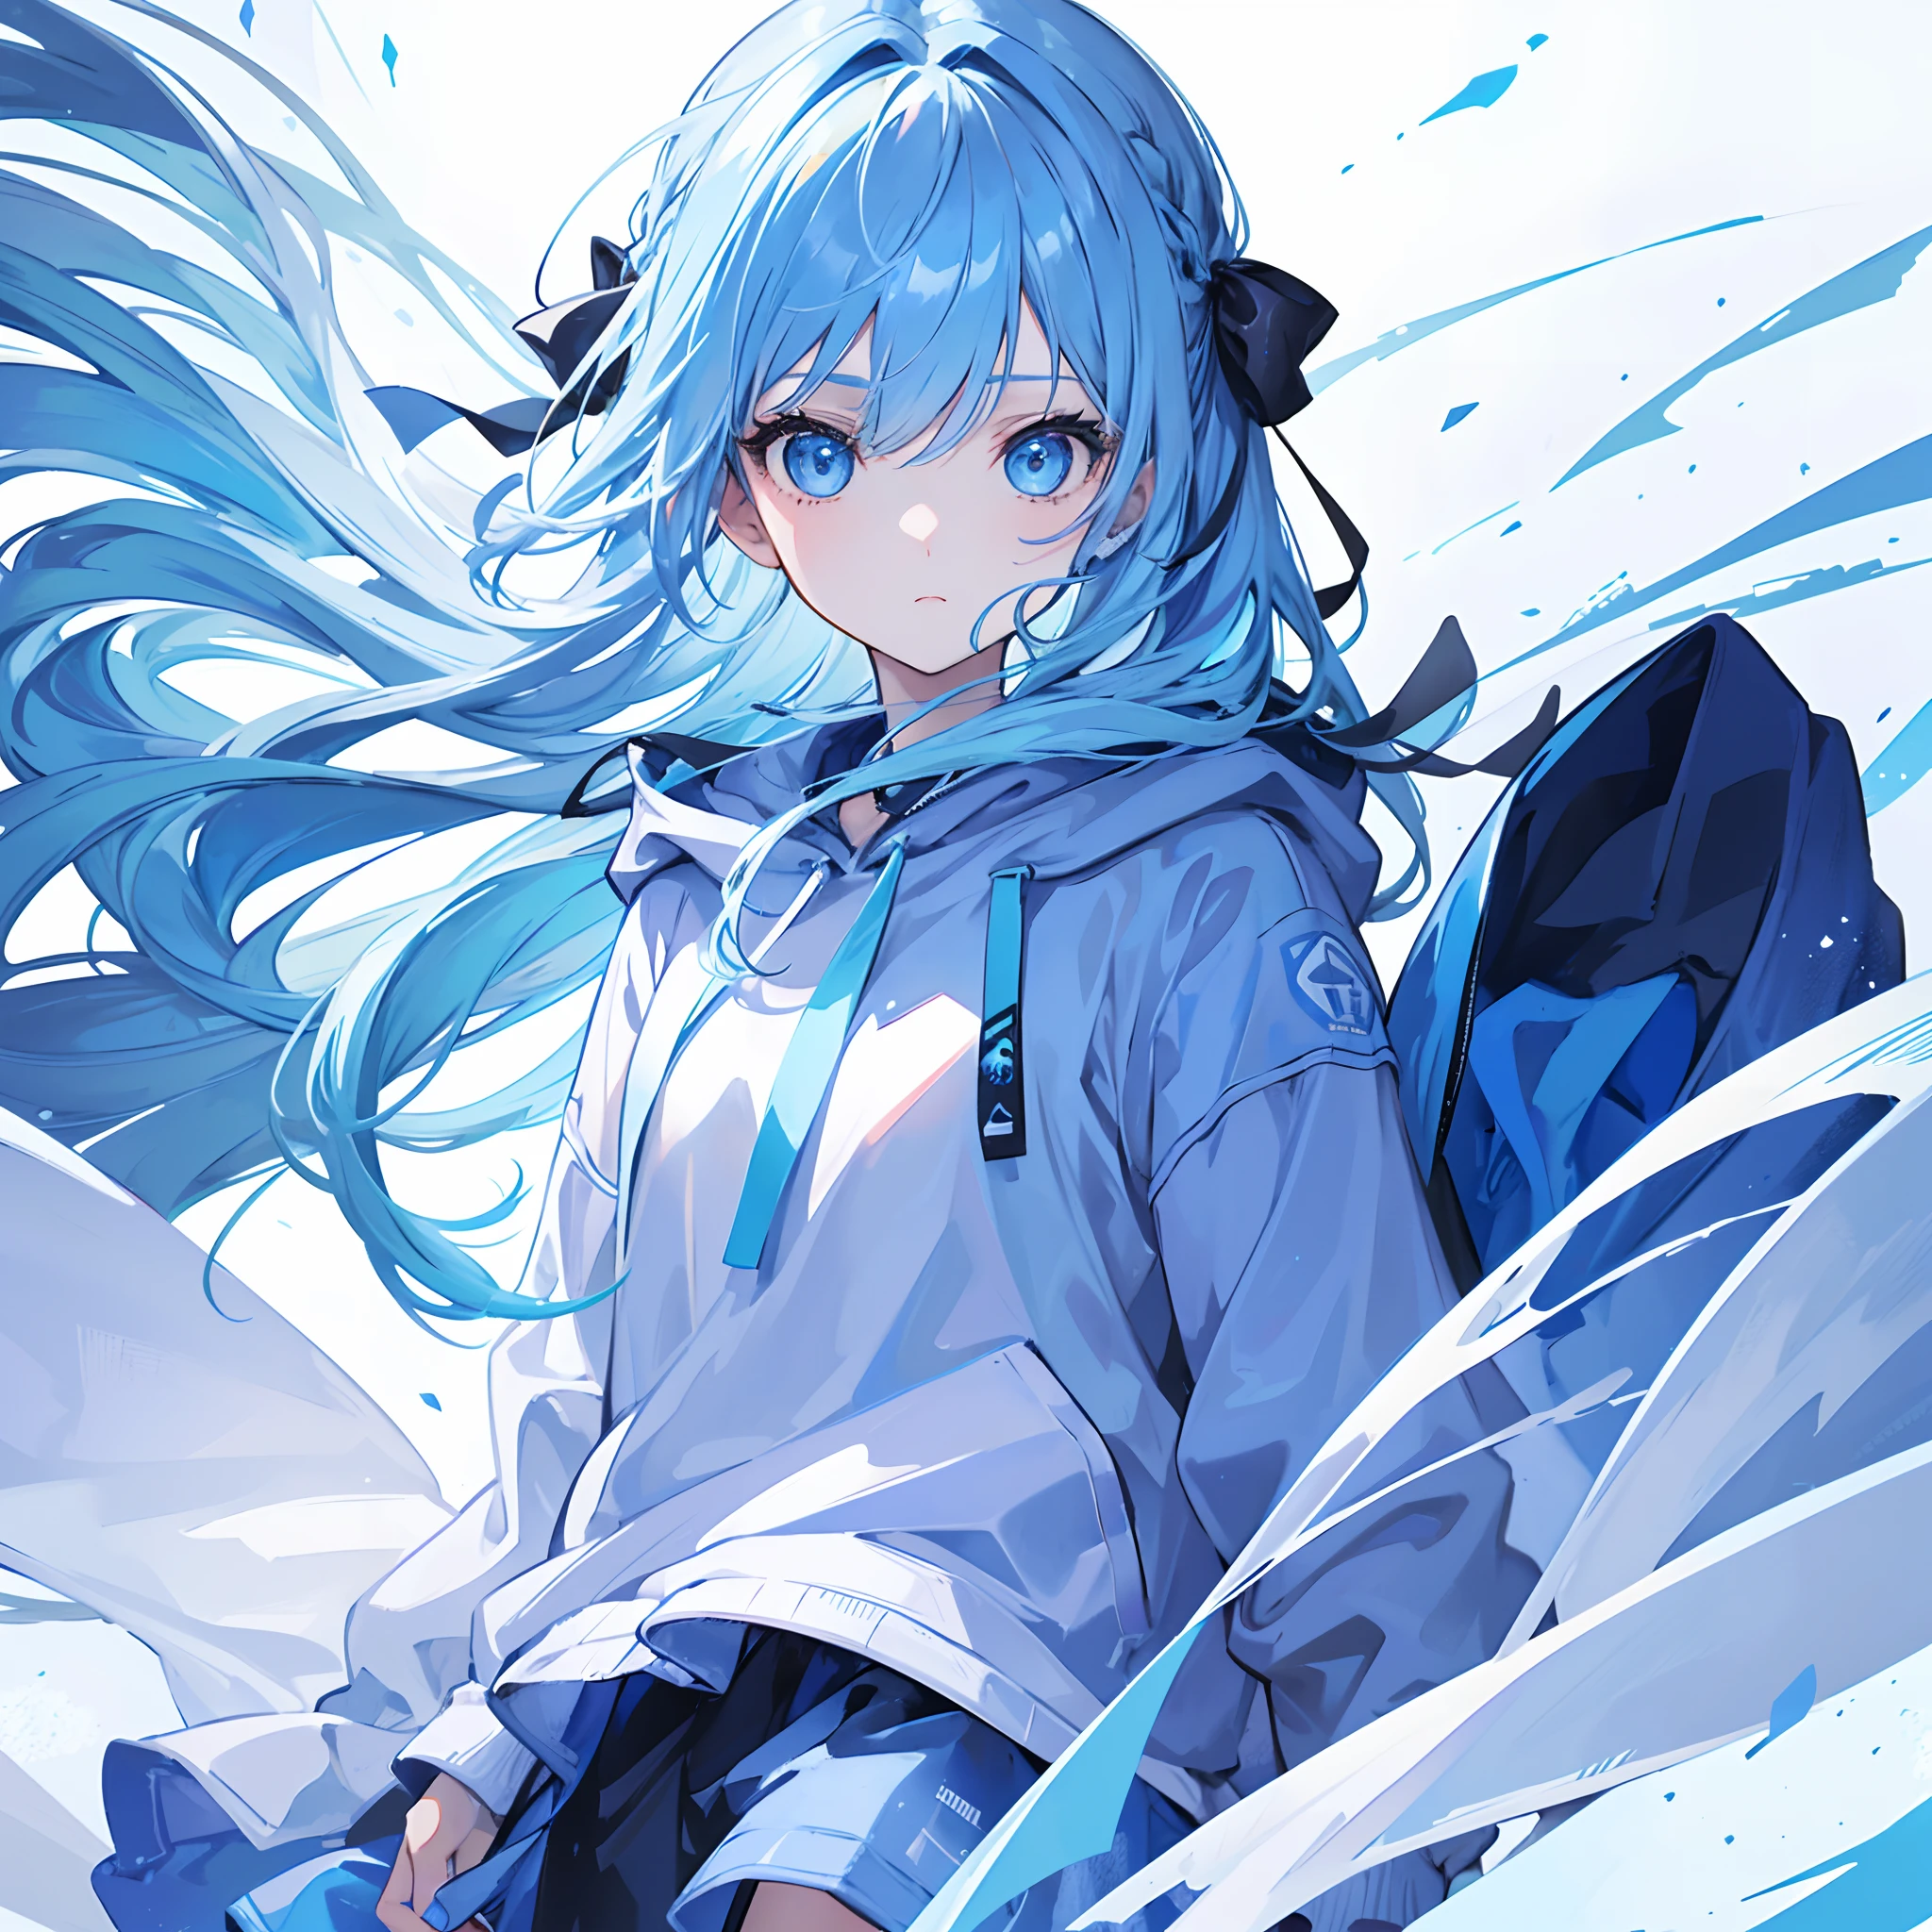 1girl, with light blue hair and blue eyes, wearing a hair ribbon and a blue and white hoodie. The scene is set in winter, with the girl looking directly at the viewer. This image can be used as a profile picture.